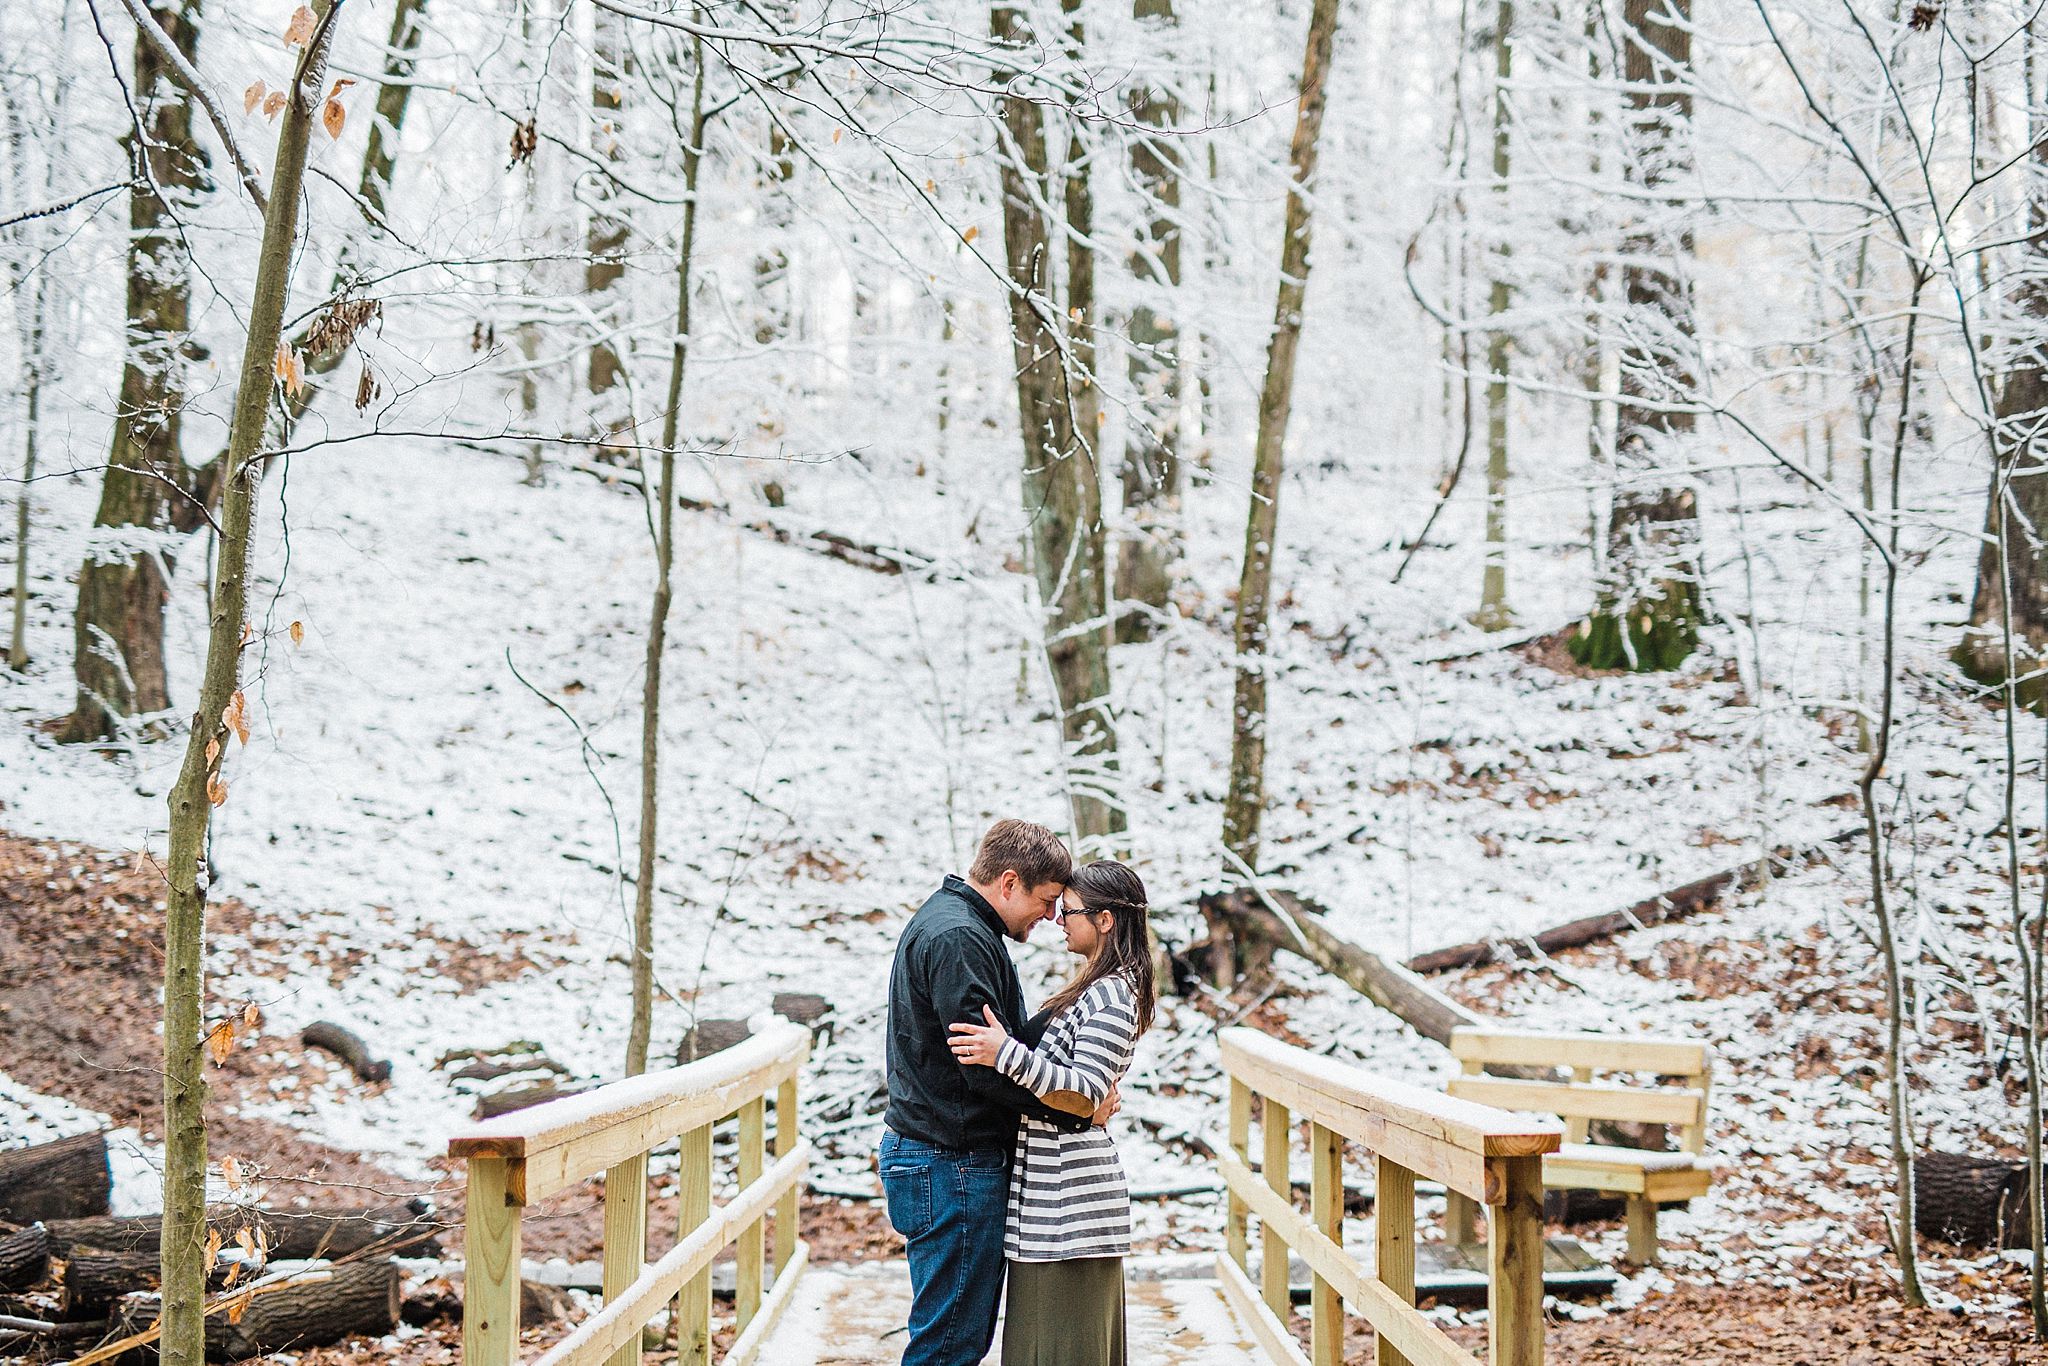 Bill and Monica Snowy Engagement Session at Wooster Memorial Park in Wooster Ohio | Wedding and Engagement Photographer in Wooster Ohio | Tiffany Reiff Photography and Design